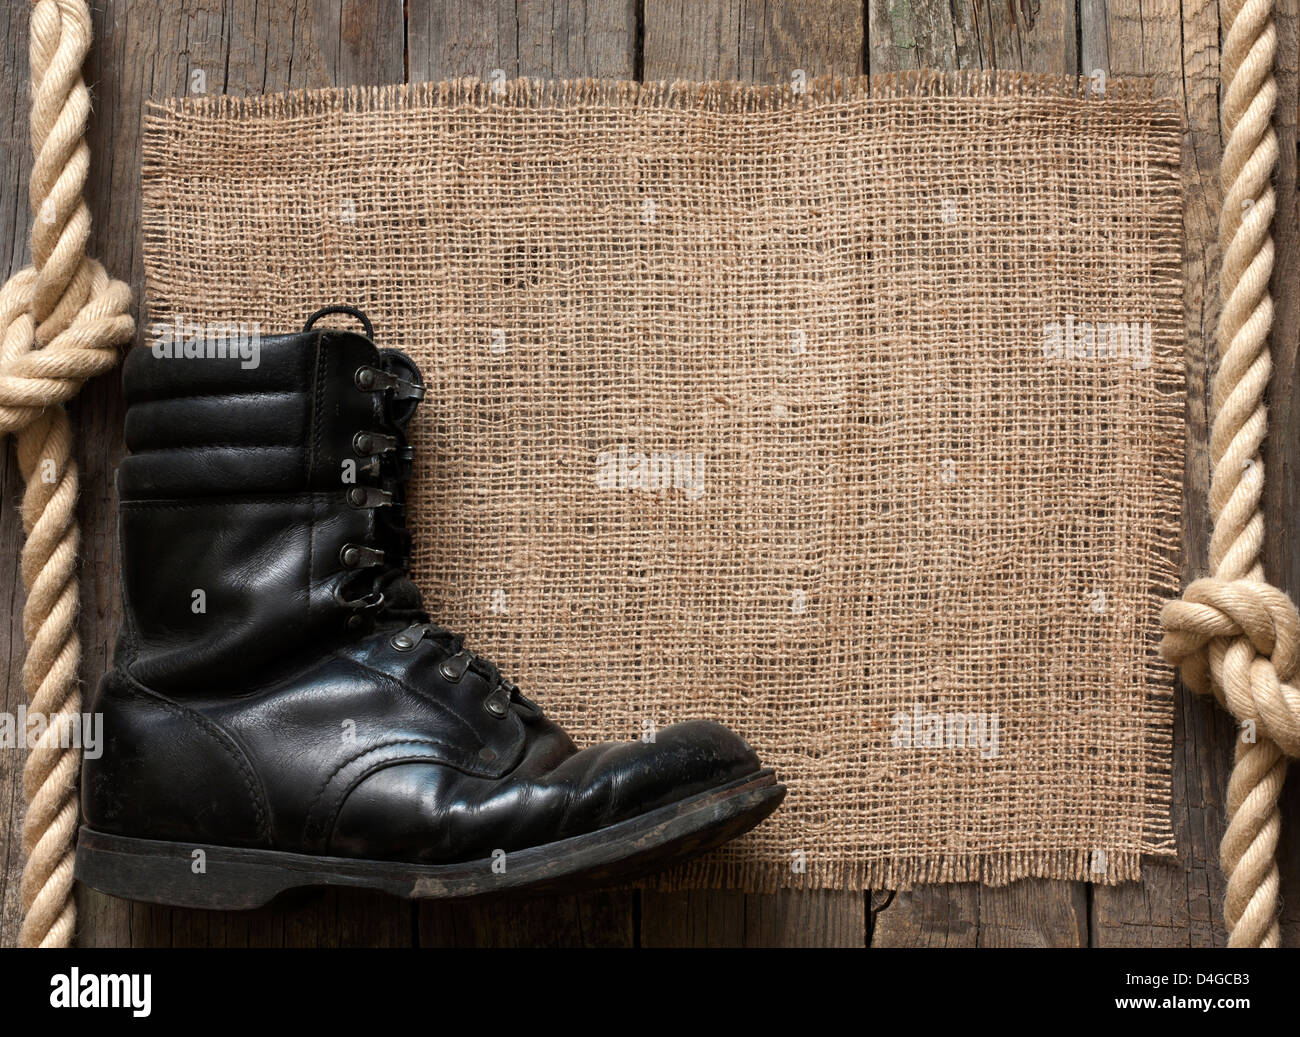 Old military shoes on wooden boards abstract background concept Stock Photo